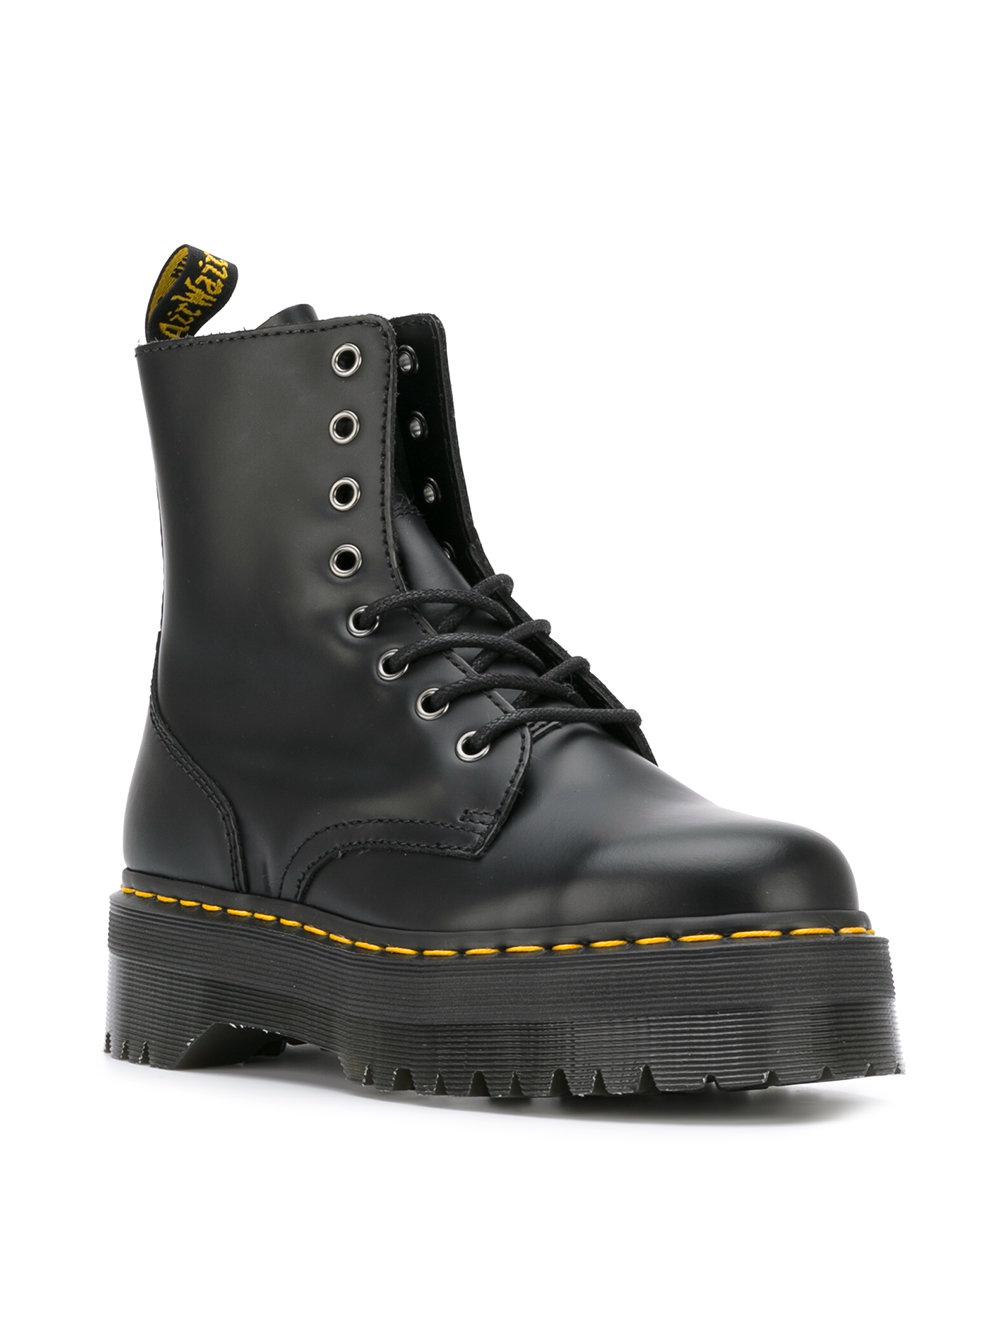 Dr. Martens Leather Lace-up Boots in Black - Lyst